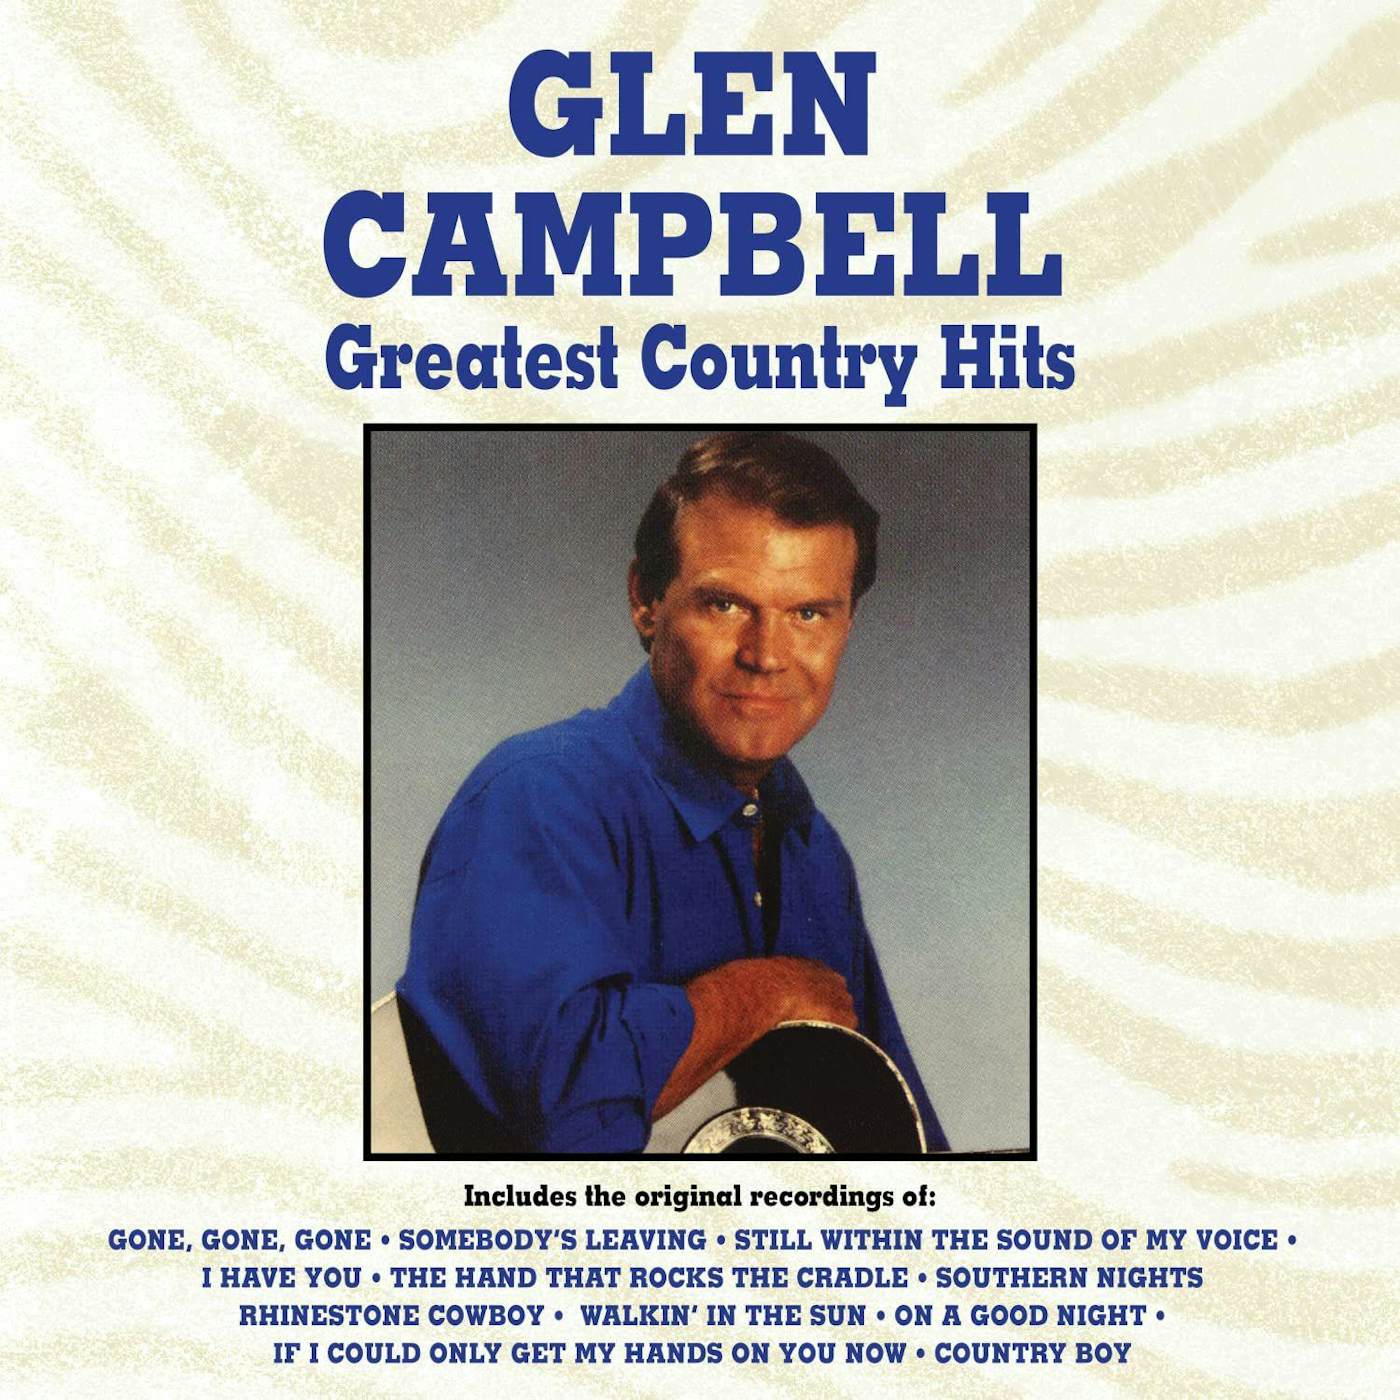 Glen Campbell GREATEST COUNTRY HITS Vinyl Record